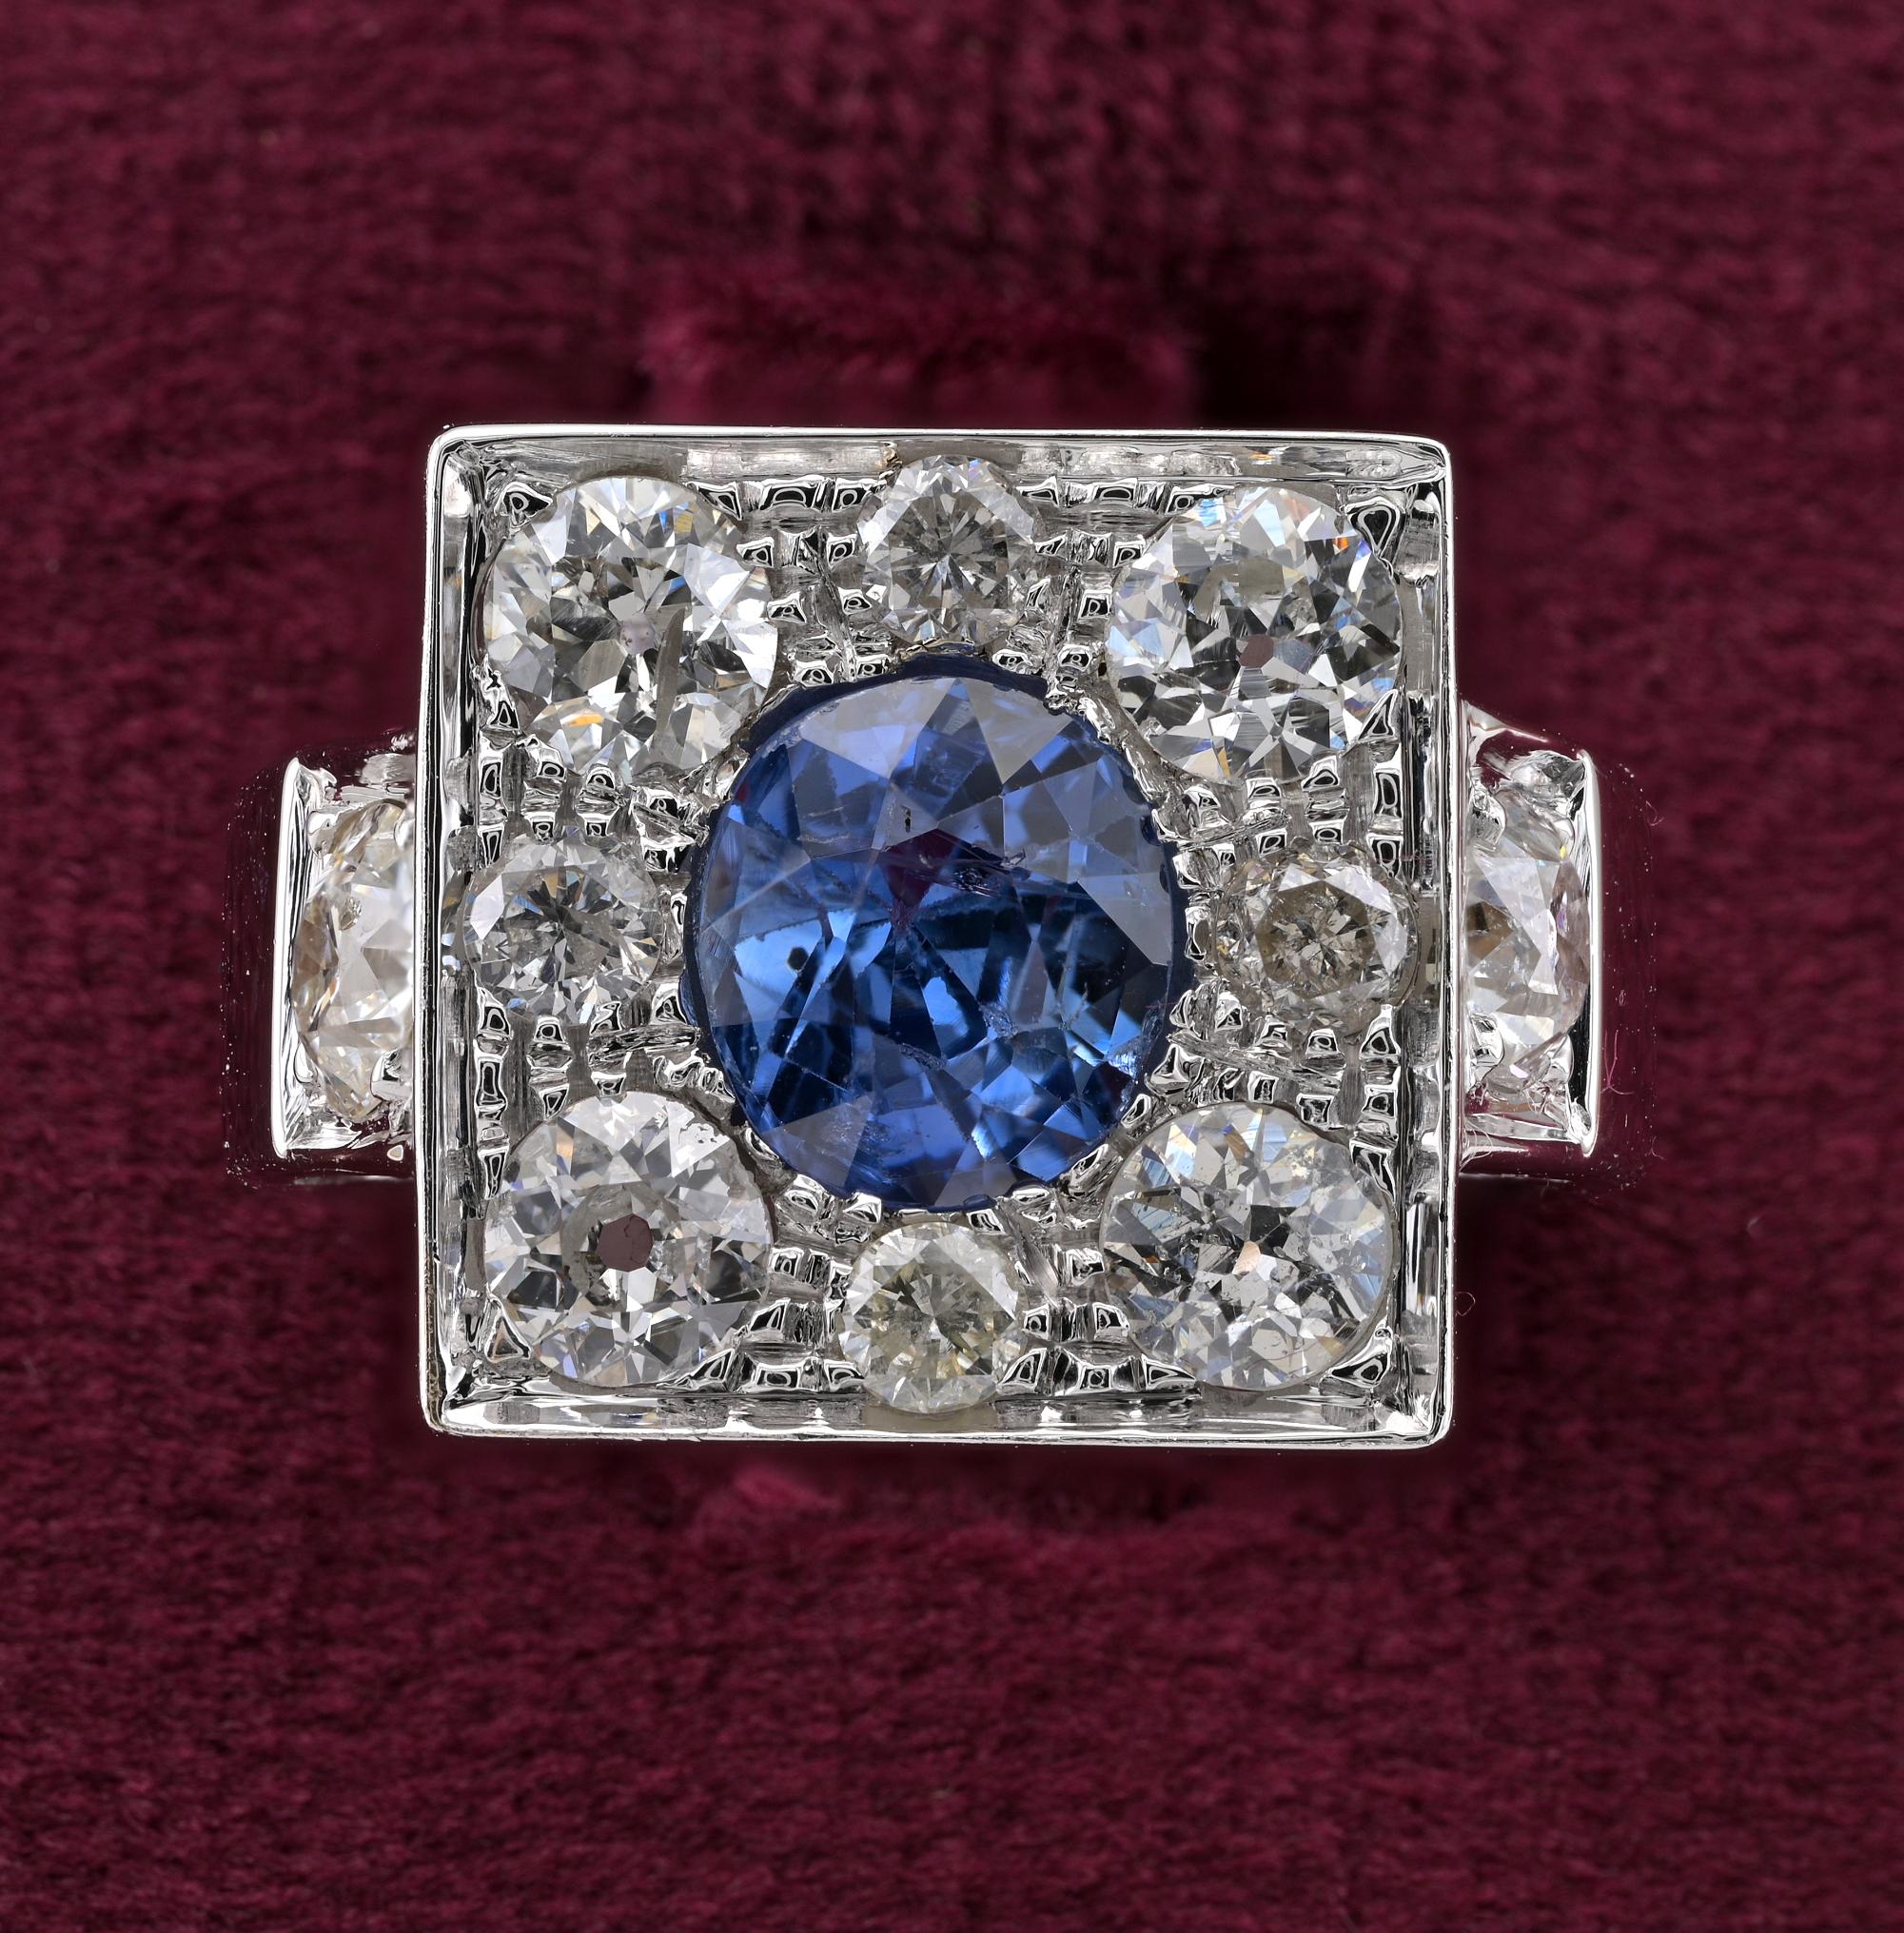 This outstanding Diamond and Sapphire ring is mid century, or late Retro
18 Kt white gold, sturdy, well hand constructed mounting quite different and unique
The squarish crown raises up with an impressive impact of gemstones joined to a wide plain